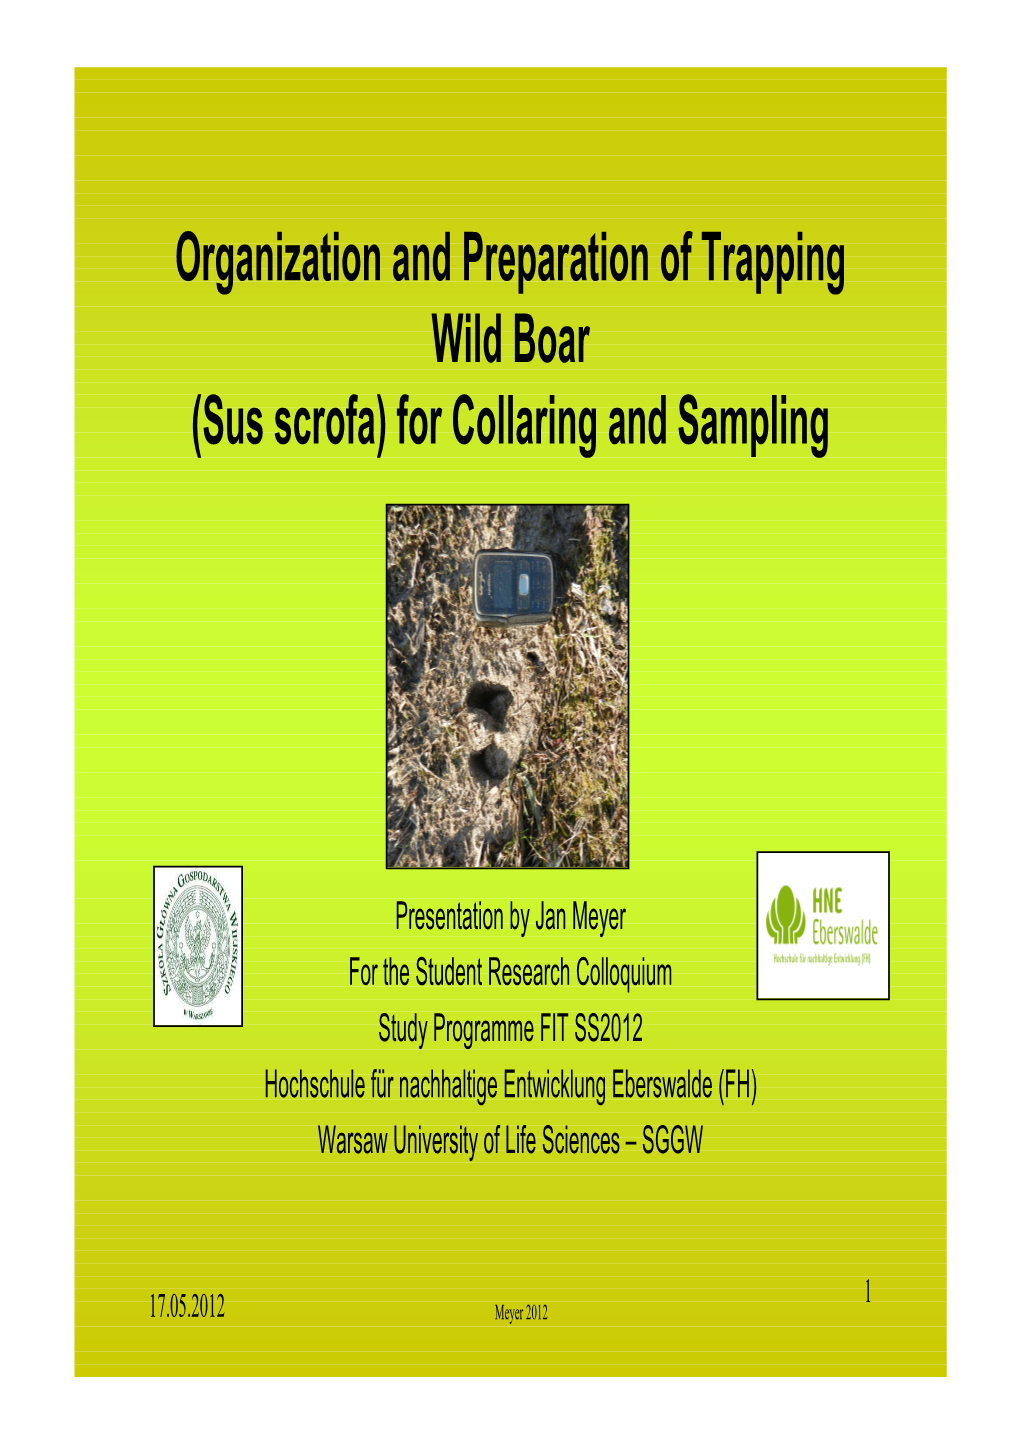 Organization and Preparation of Trapping Wild Boar (Sus Scrofa) for Collaring and Sampling